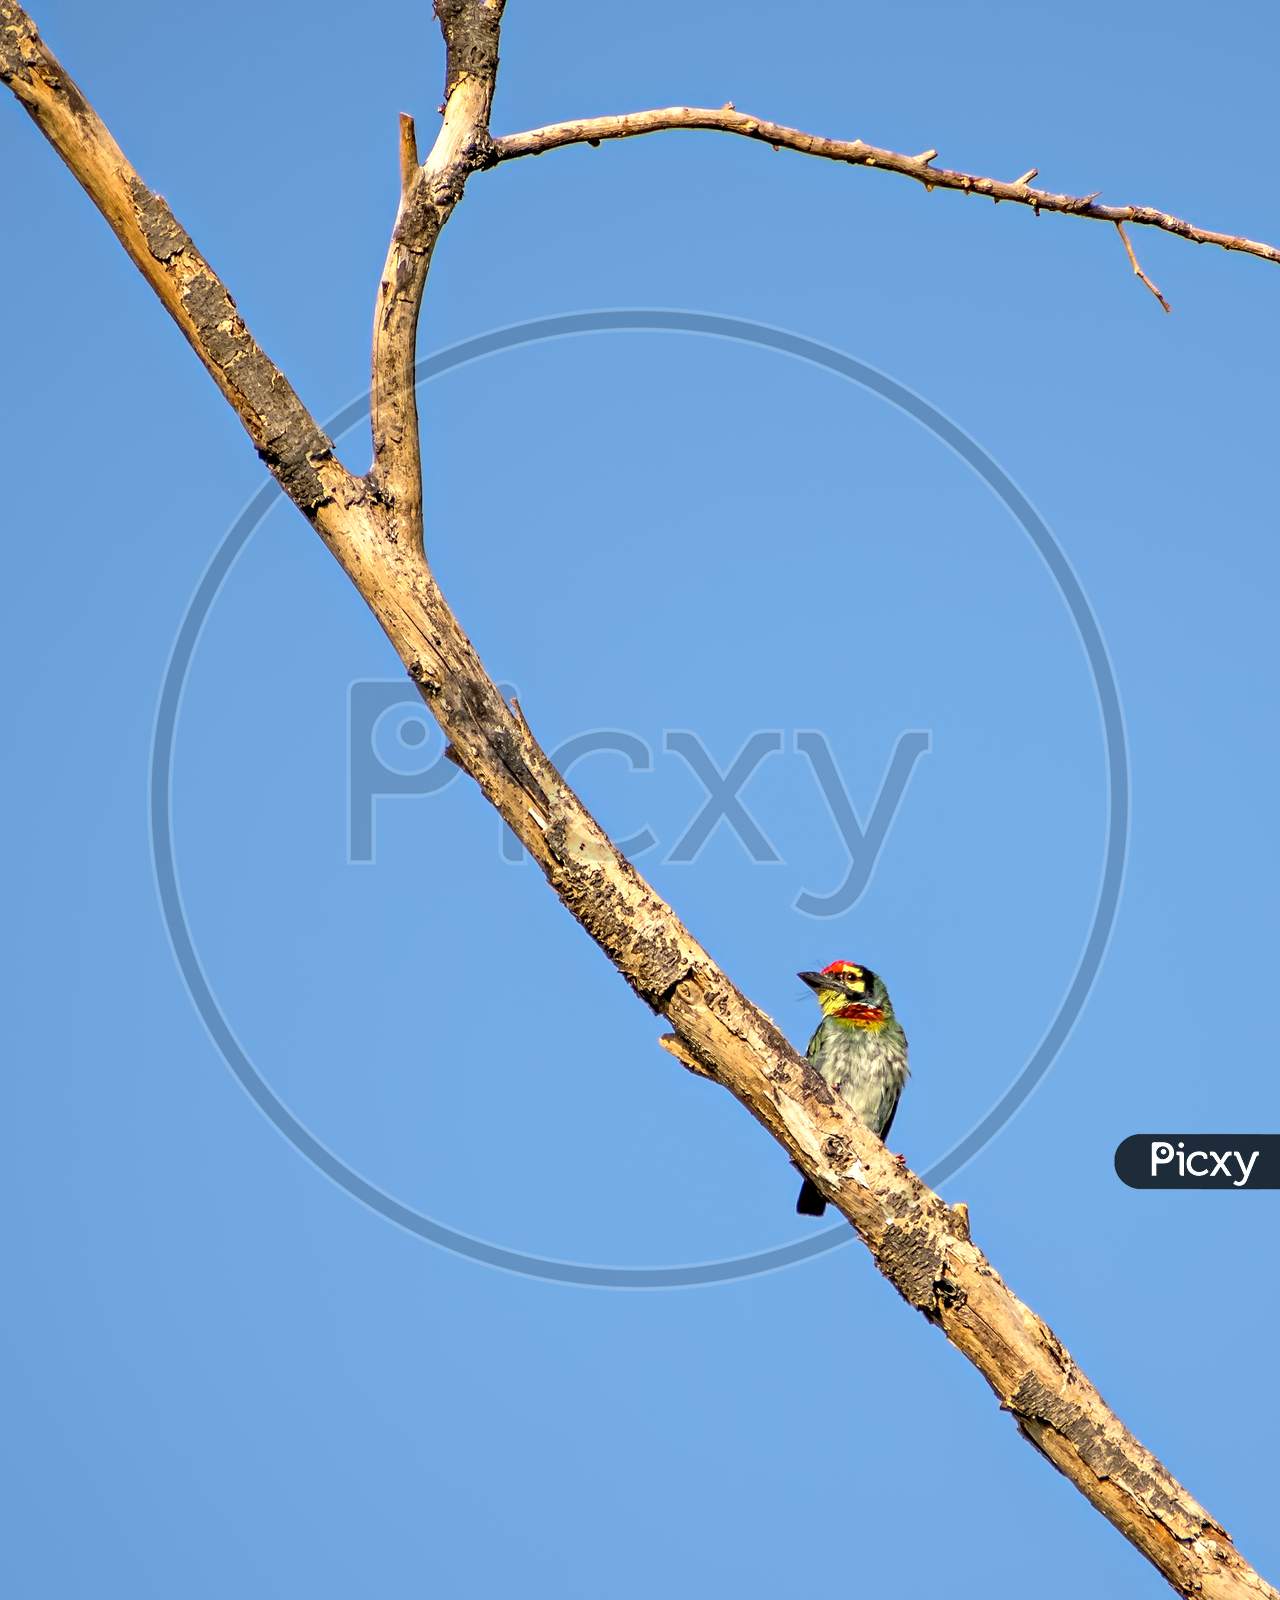 Isolated Image Of Copper Smith Barbet Bird, Sitting On A Dry Tree Branch.